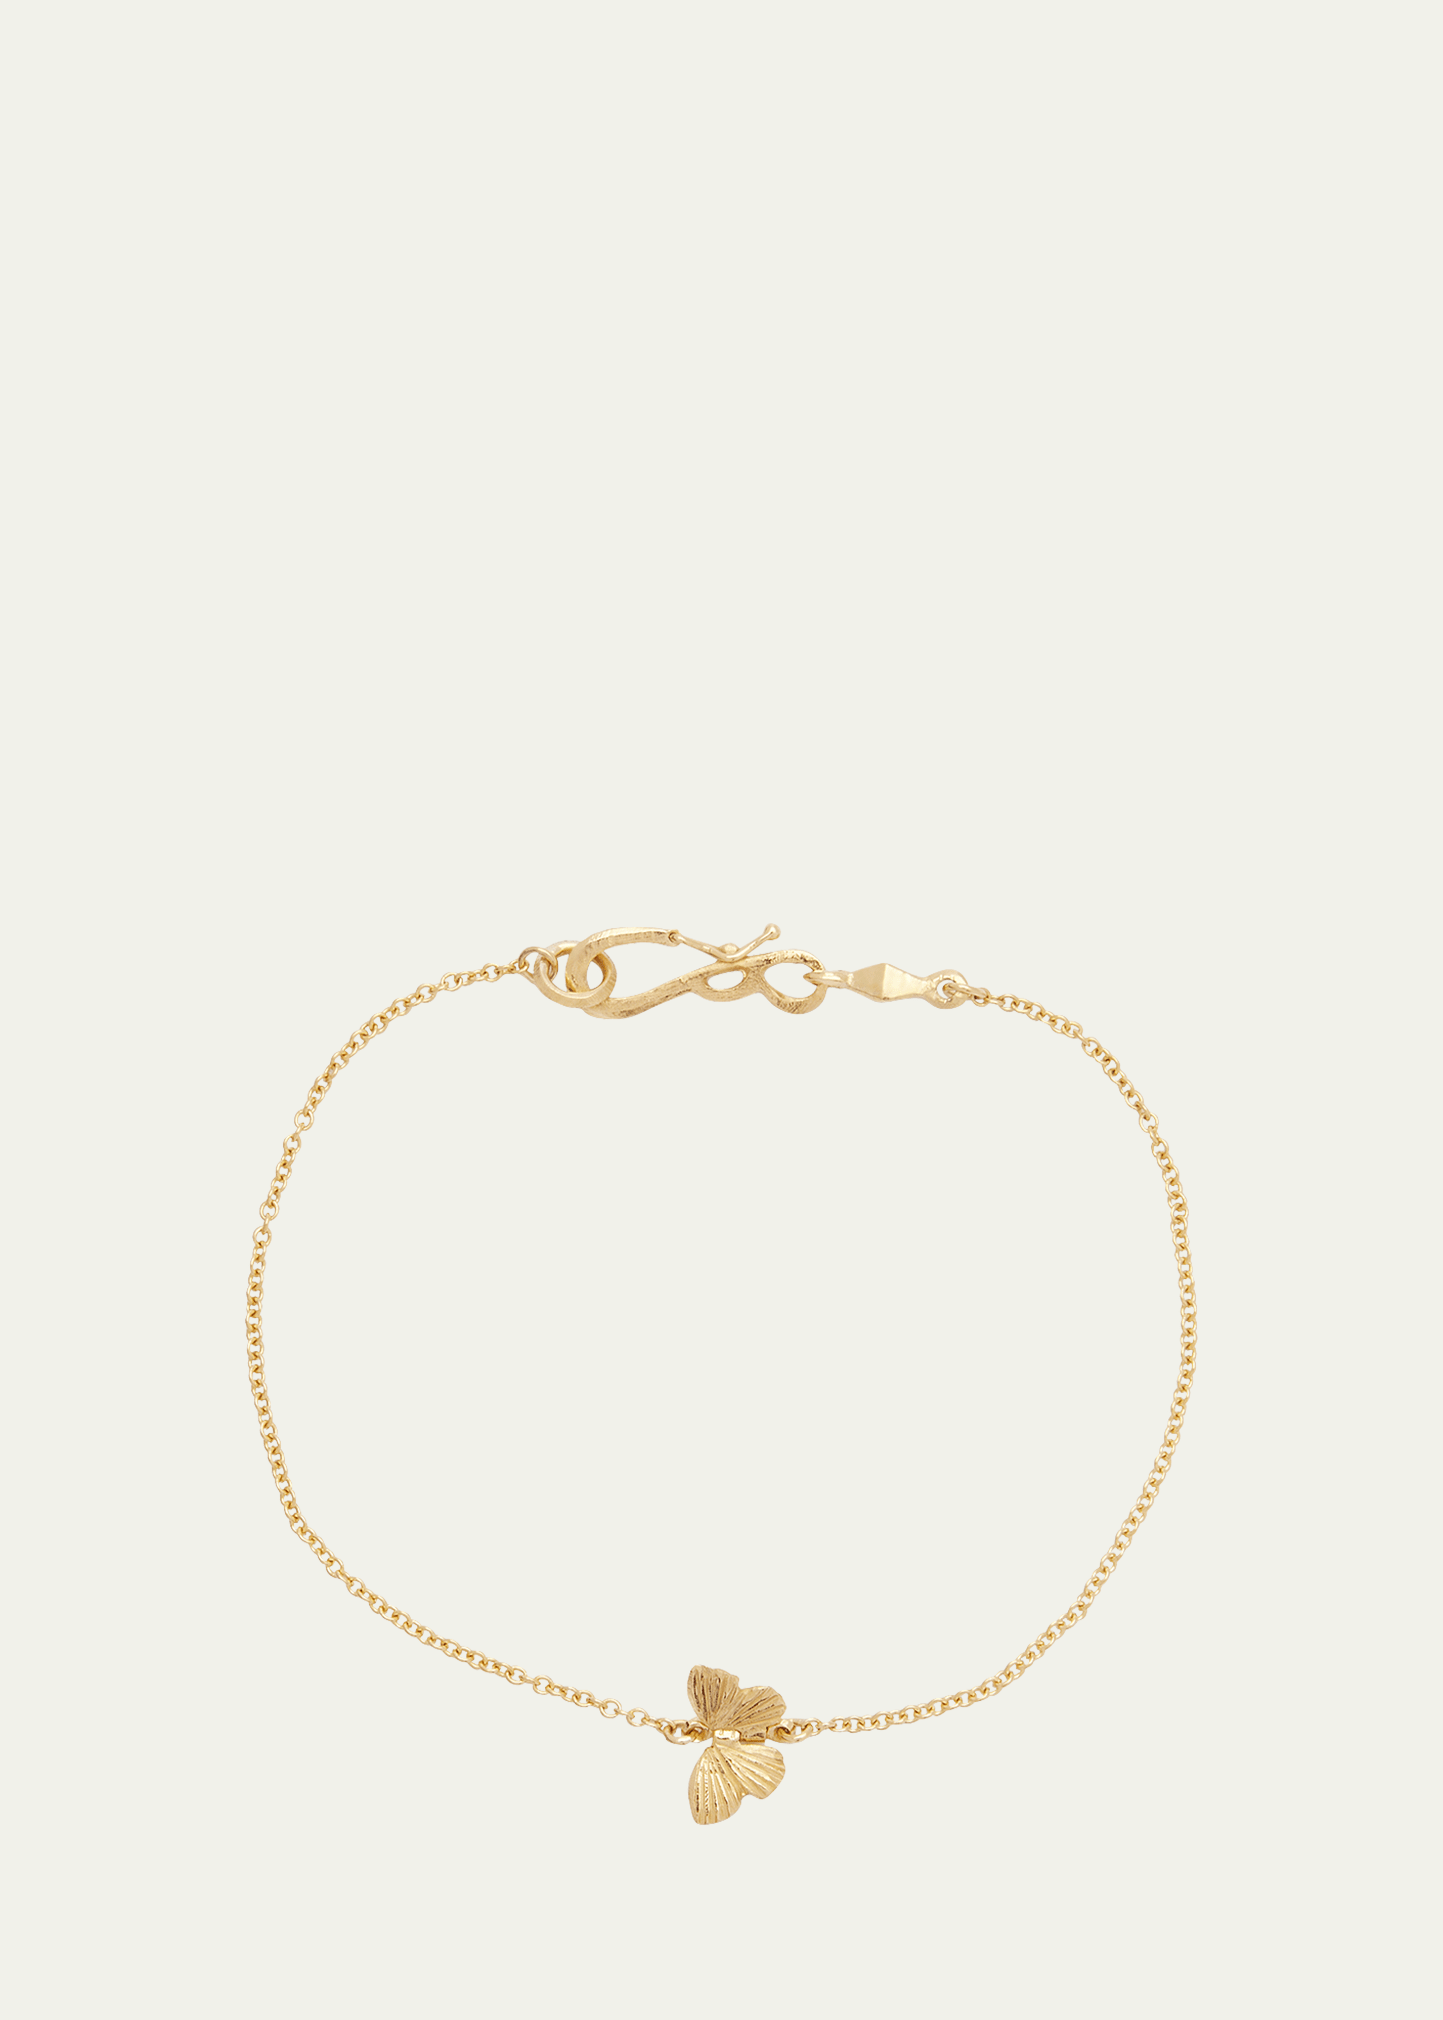 Migration Chain Bracelet in Solid 18k Yellow Gold